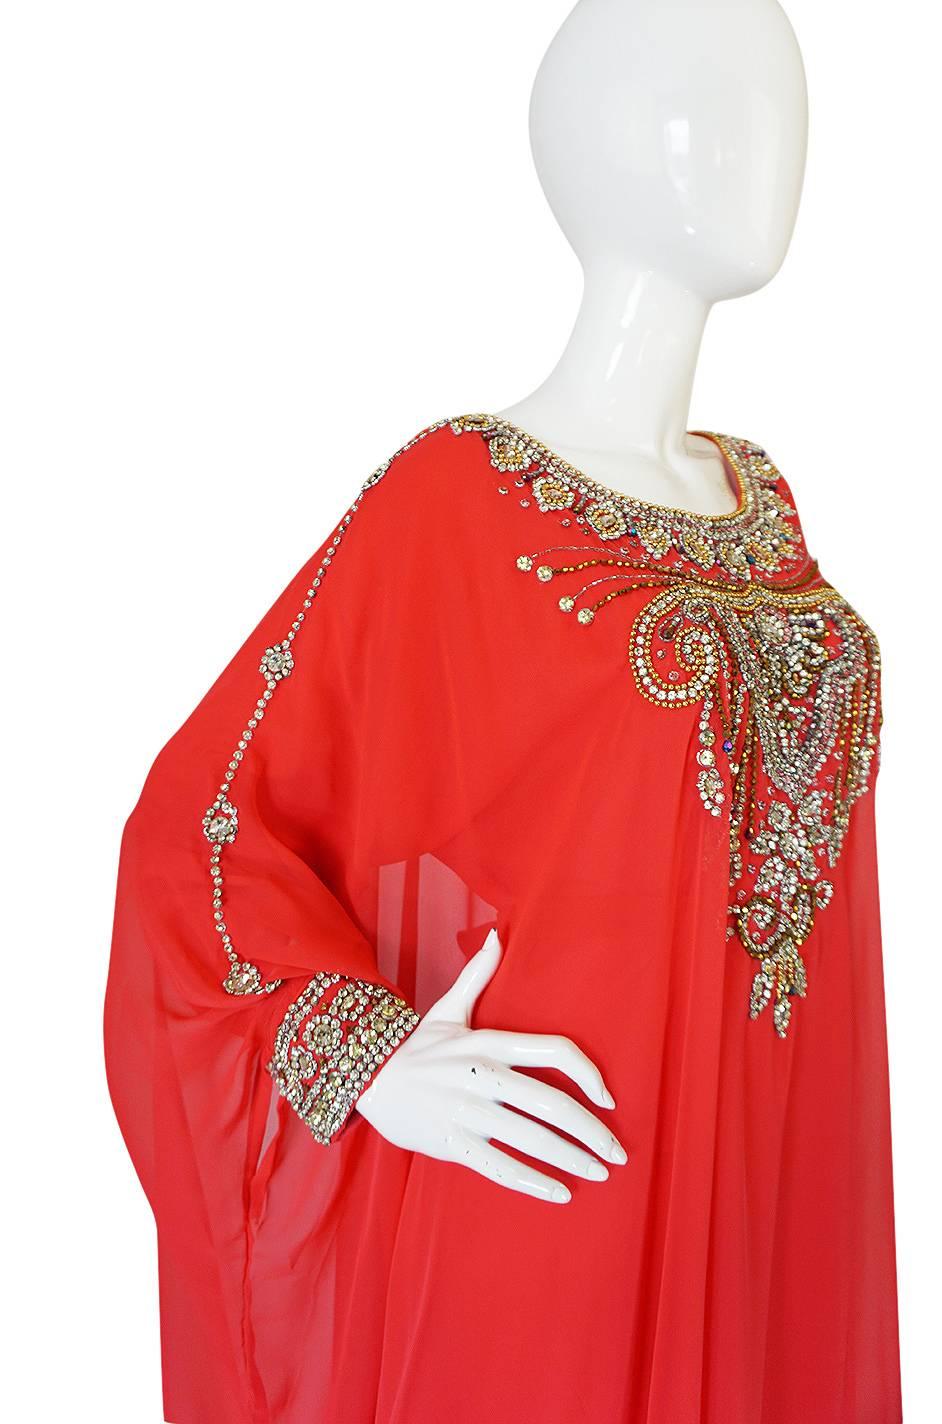 1960s Elaborate Crystal Covered Jewelled Red Caftan Dress 2